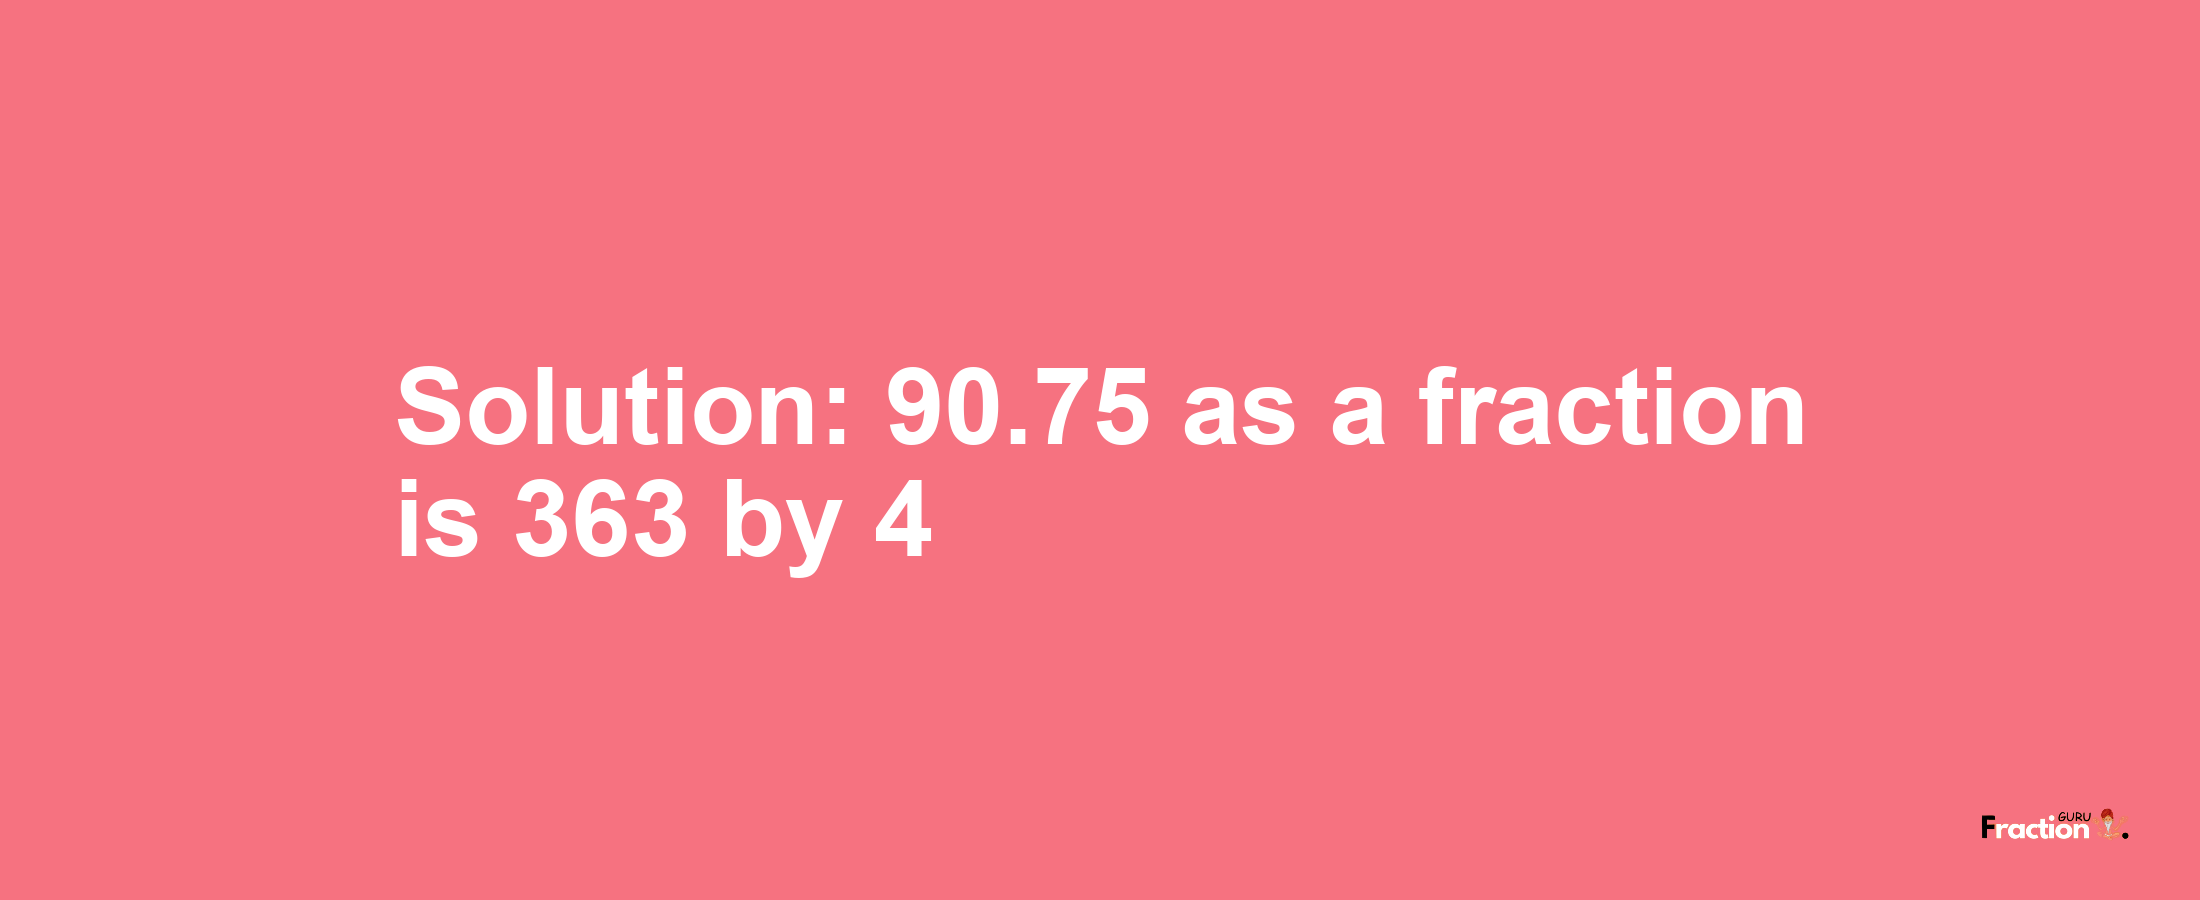 Solution:90.75 as a fraction is 363/4